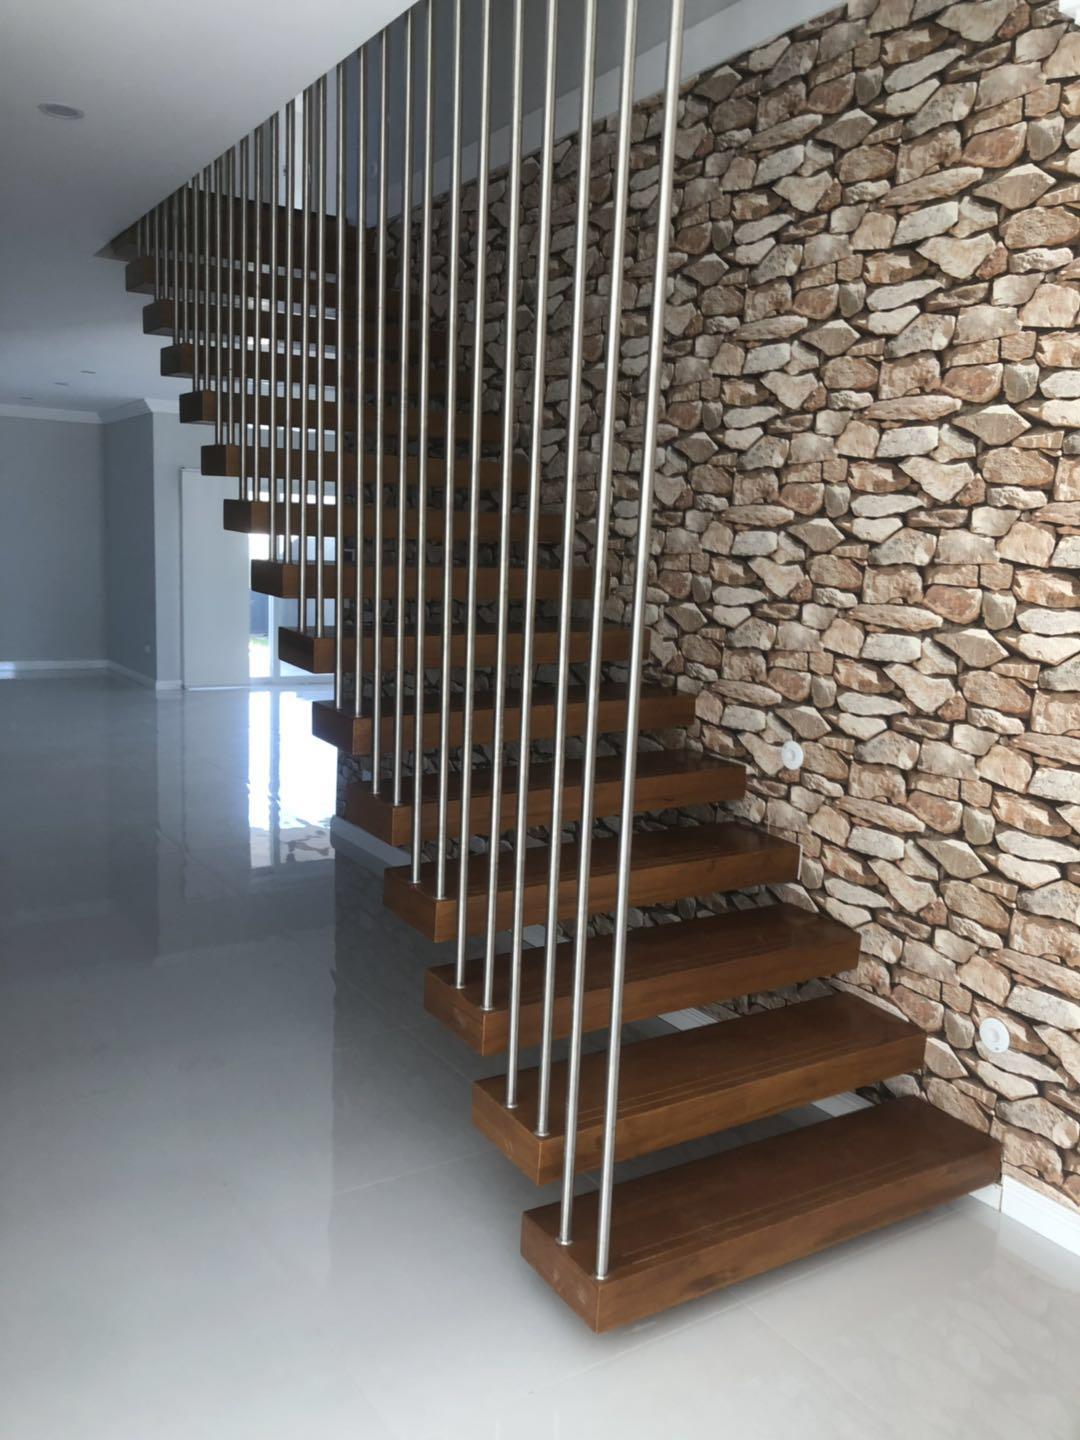 YUDI Stairs floating steps suppliers for villa